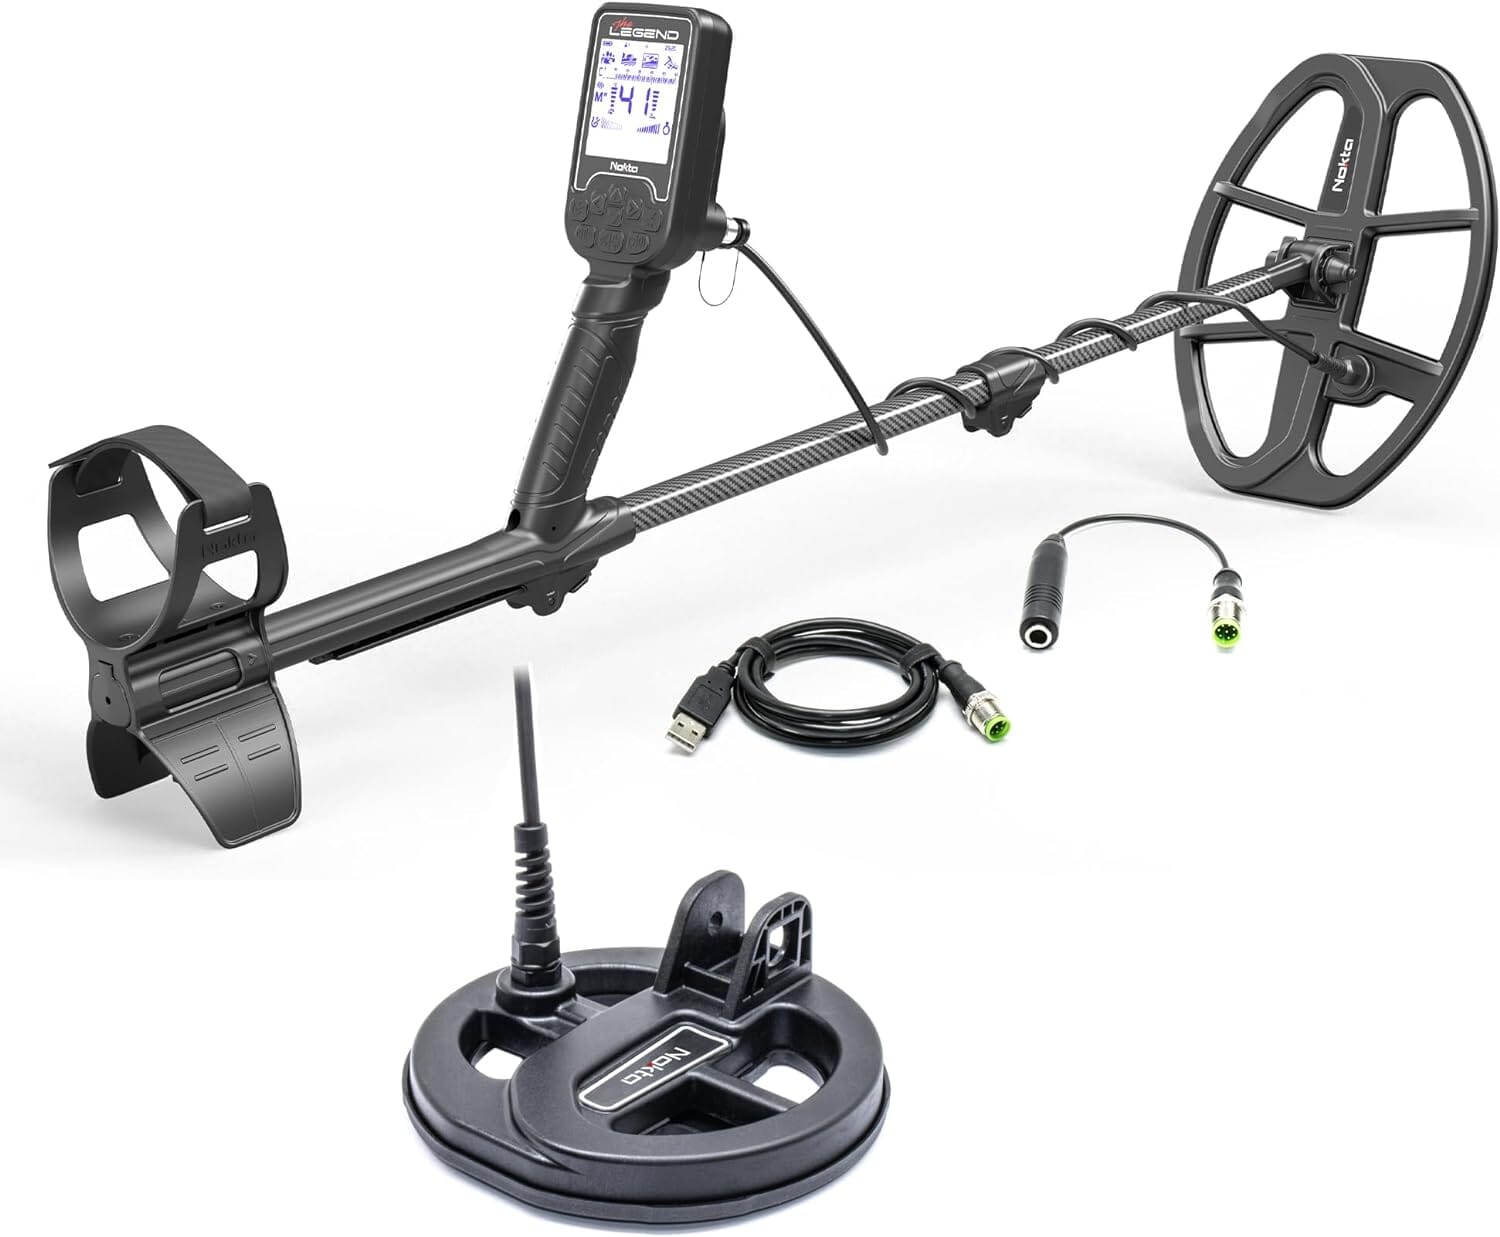 Nokta Legend, Waterproof Metal Detector with 12" x 9" LG30 Coil with FREE 6" LG15 Coil